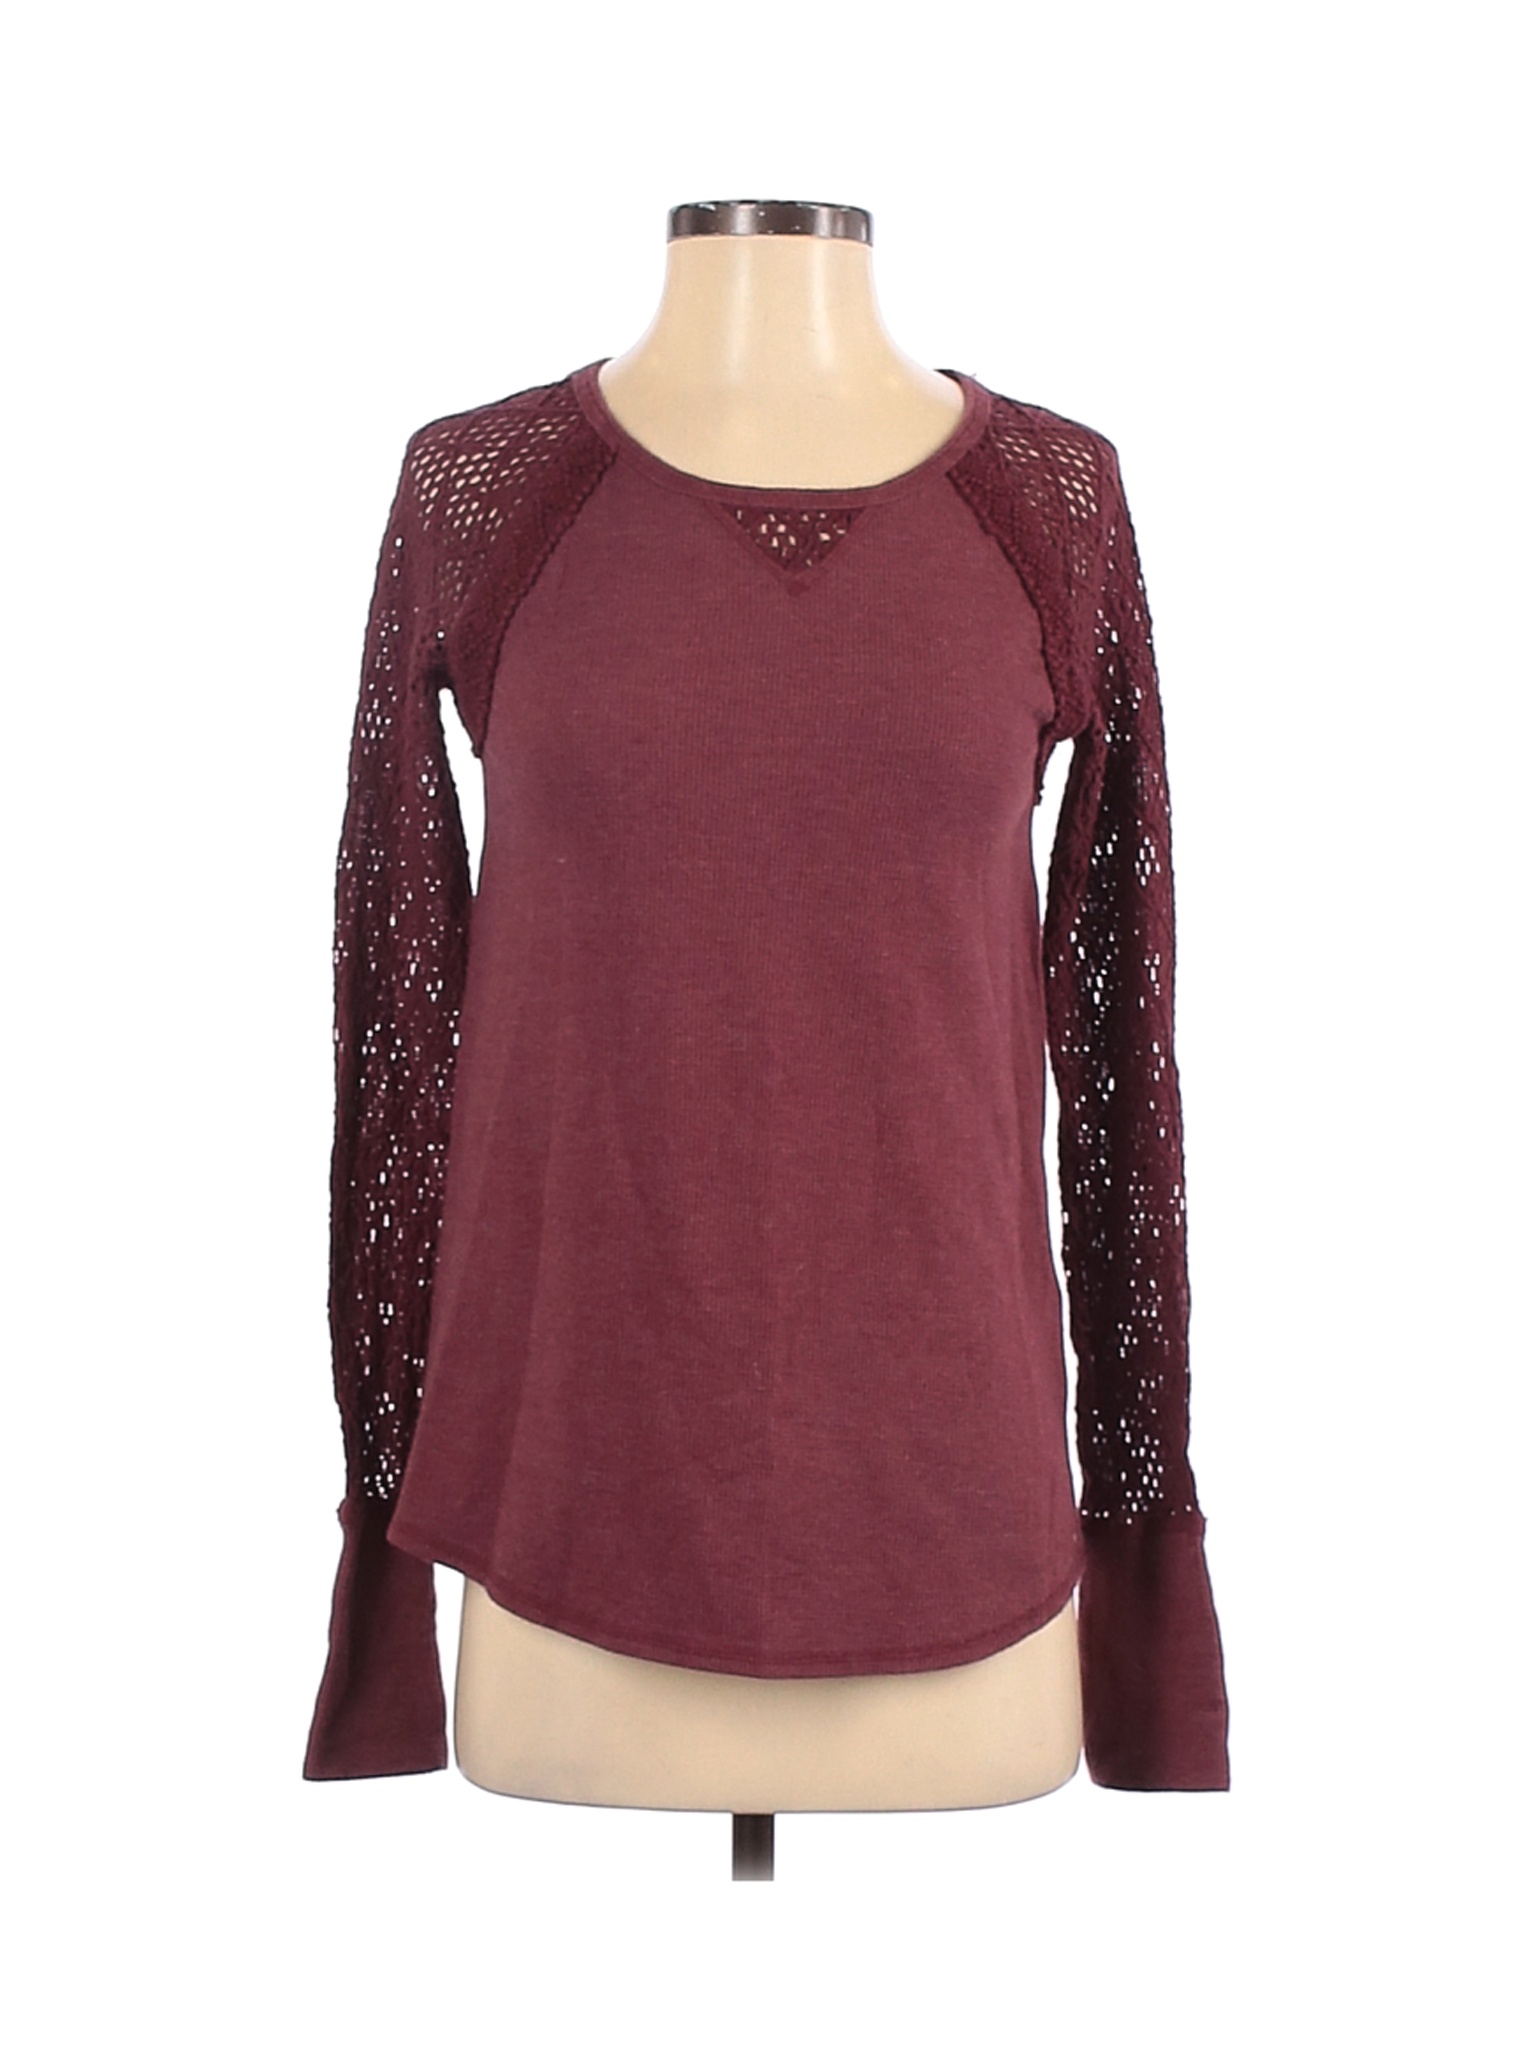 Lucky Brand Women Red Thermal Top S | eBay